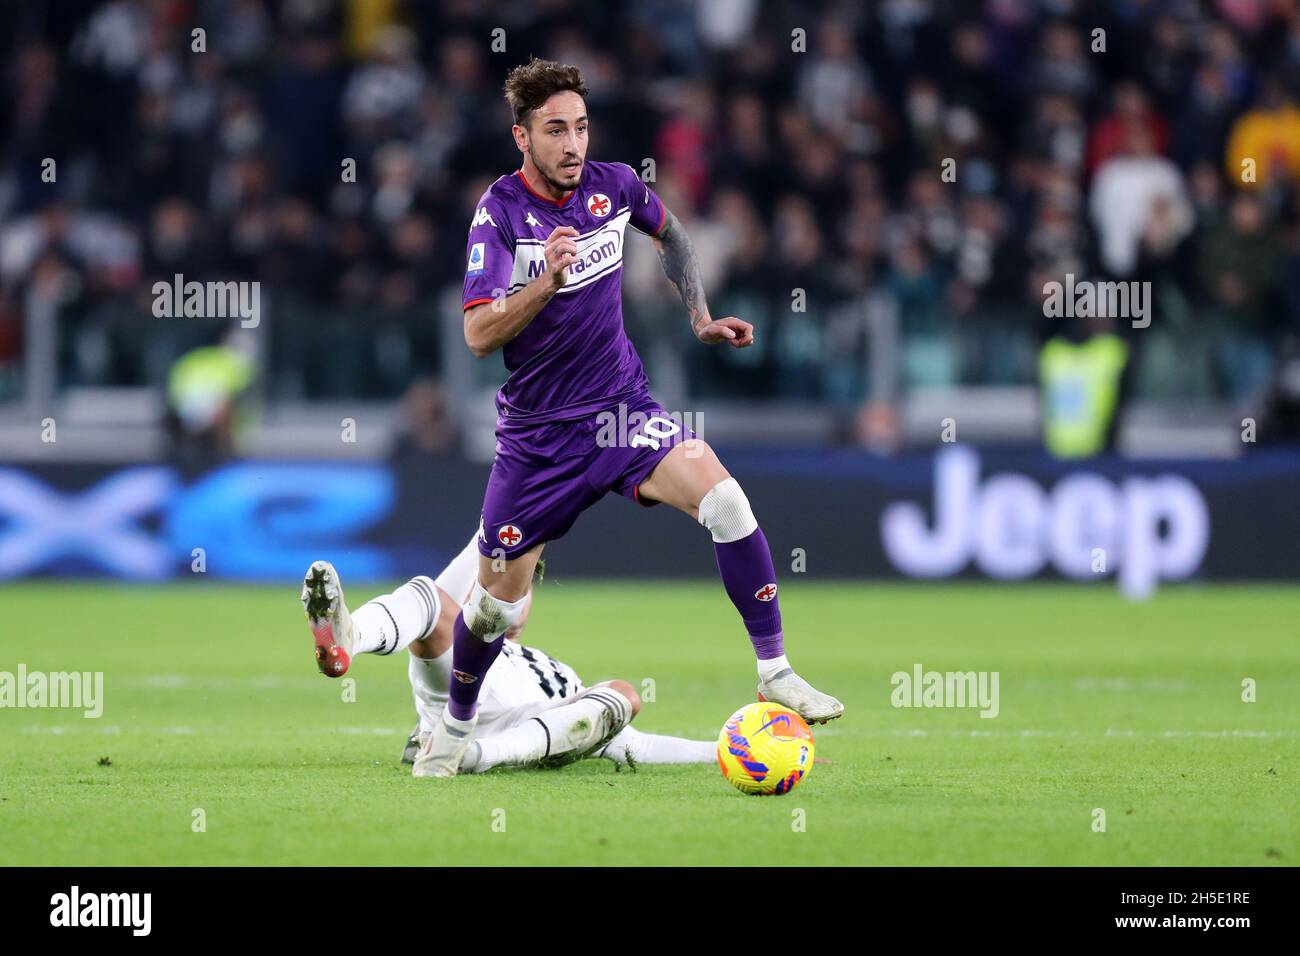 Christian Kouame of ACF Fiorentina and Alex Sandro of Juventus FC compete  for the ball during the Serie A football match between Juventus FC and ACF  Stock Photo - Alamy